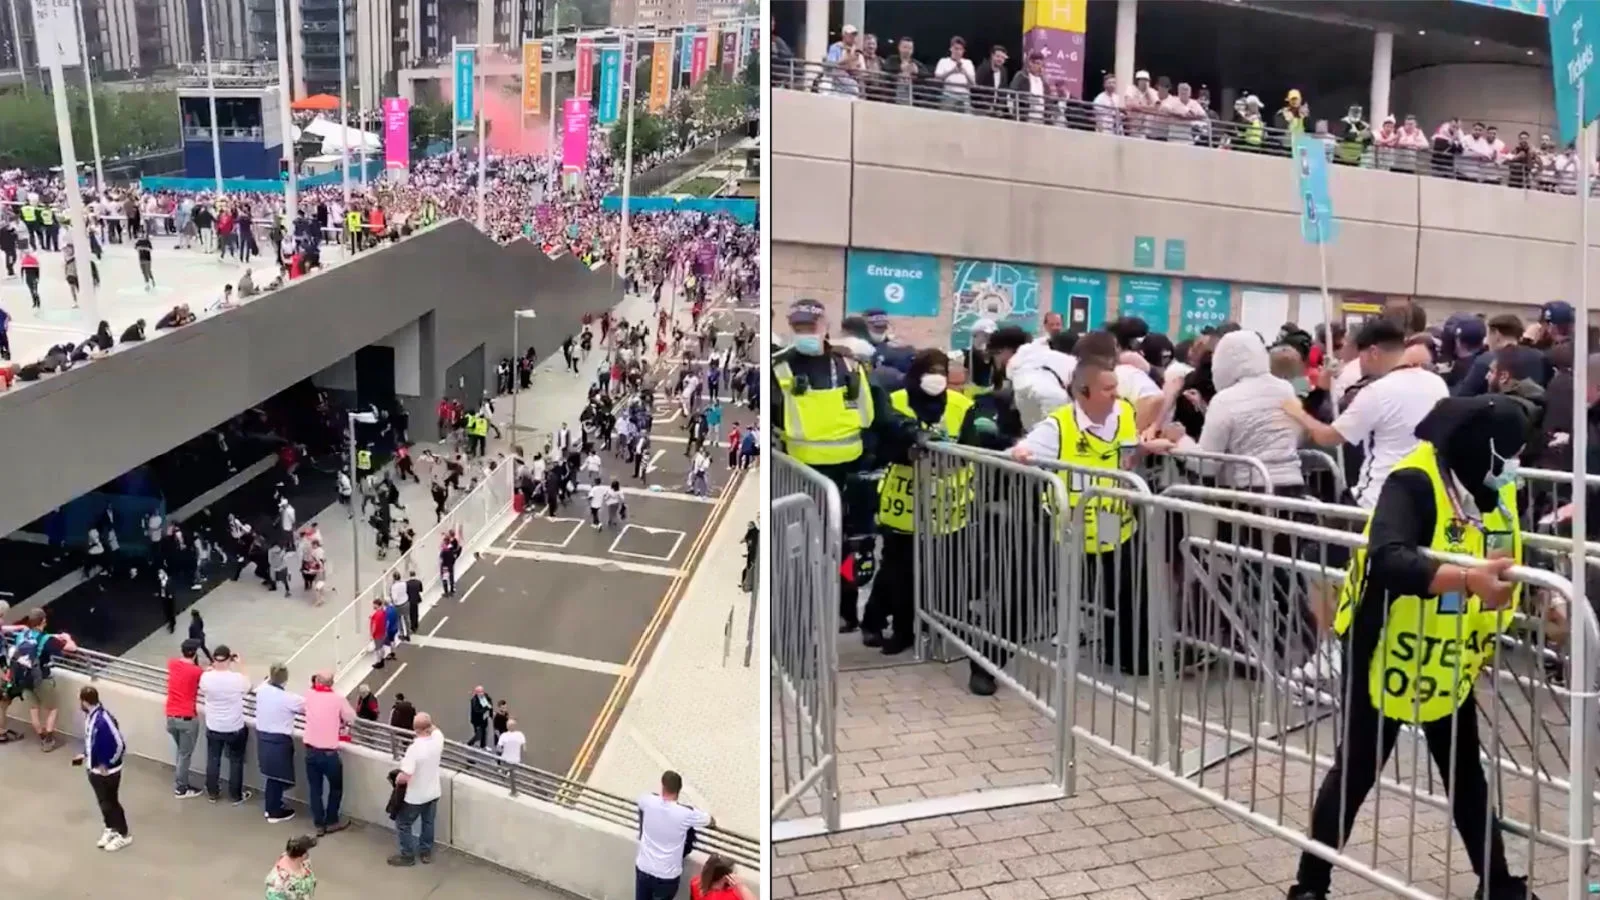 Security unable to stop the England fans without tickets storming the ticket entrances at Wembley